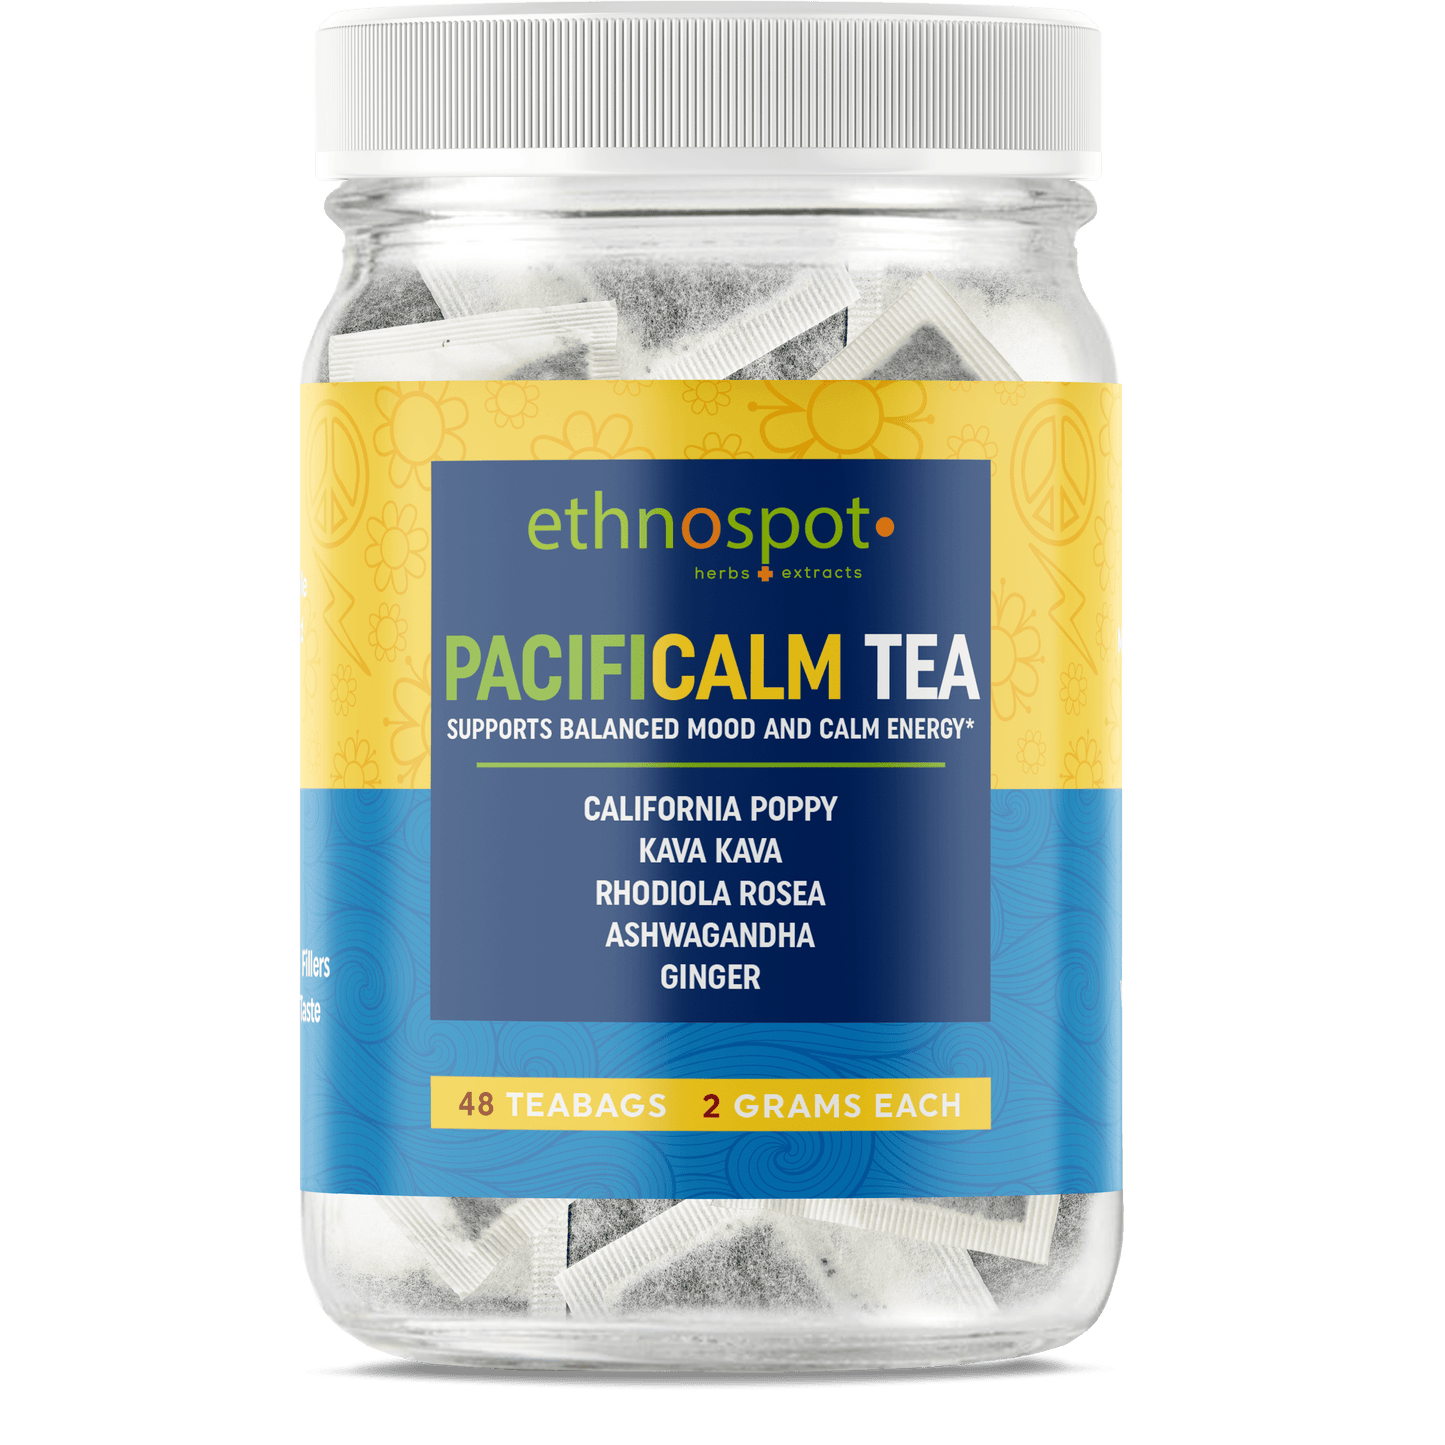 PacifiCalm Teabags - Anytime Relaxation Herbal Tea